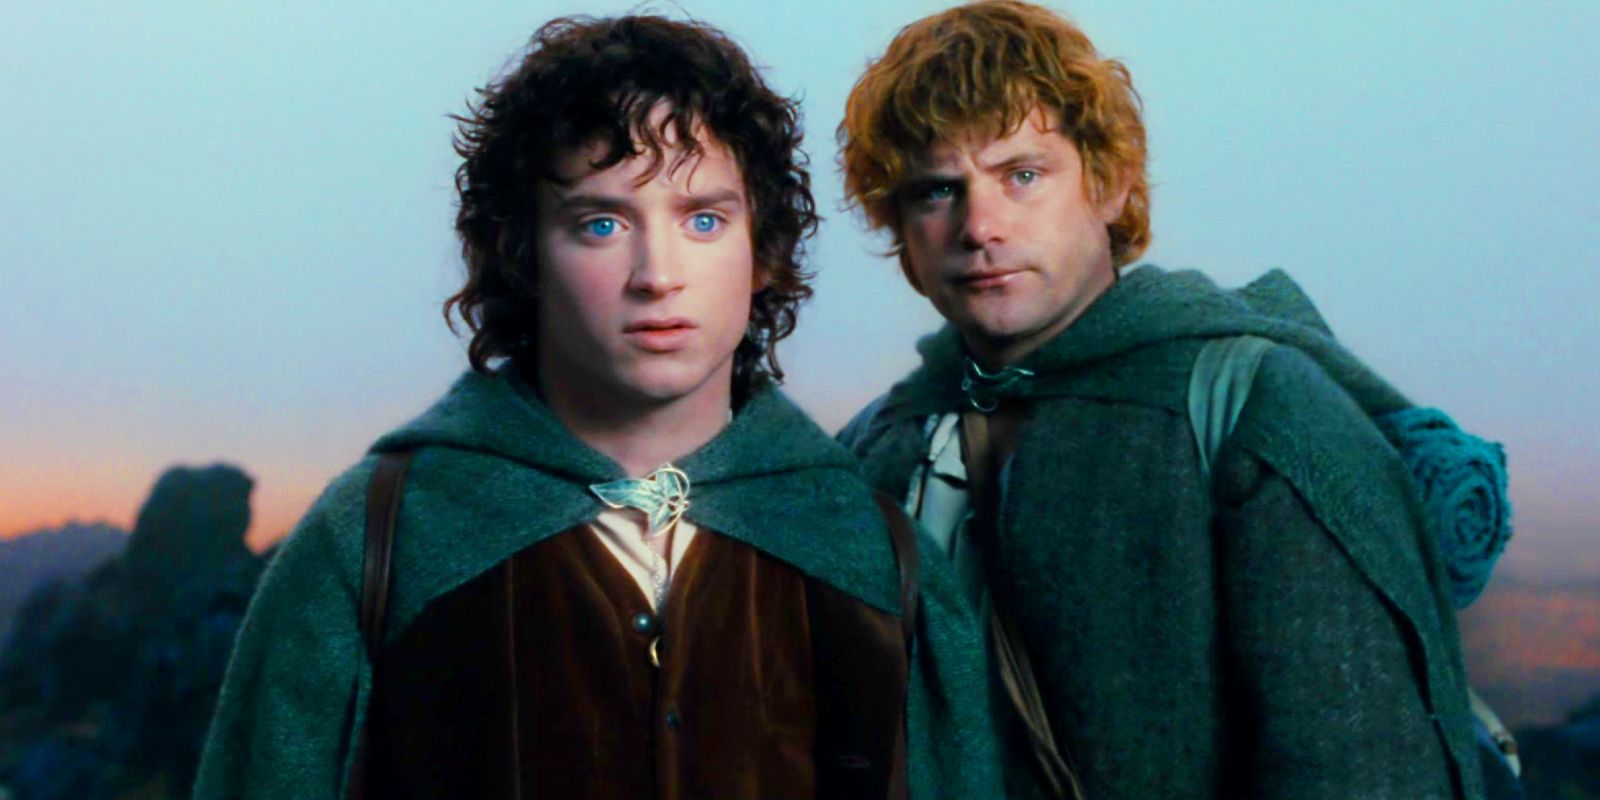 Elijah Wood as Frodo and Sean Astin as Sam in The Lord of the Rings The Fellowship of the Ring